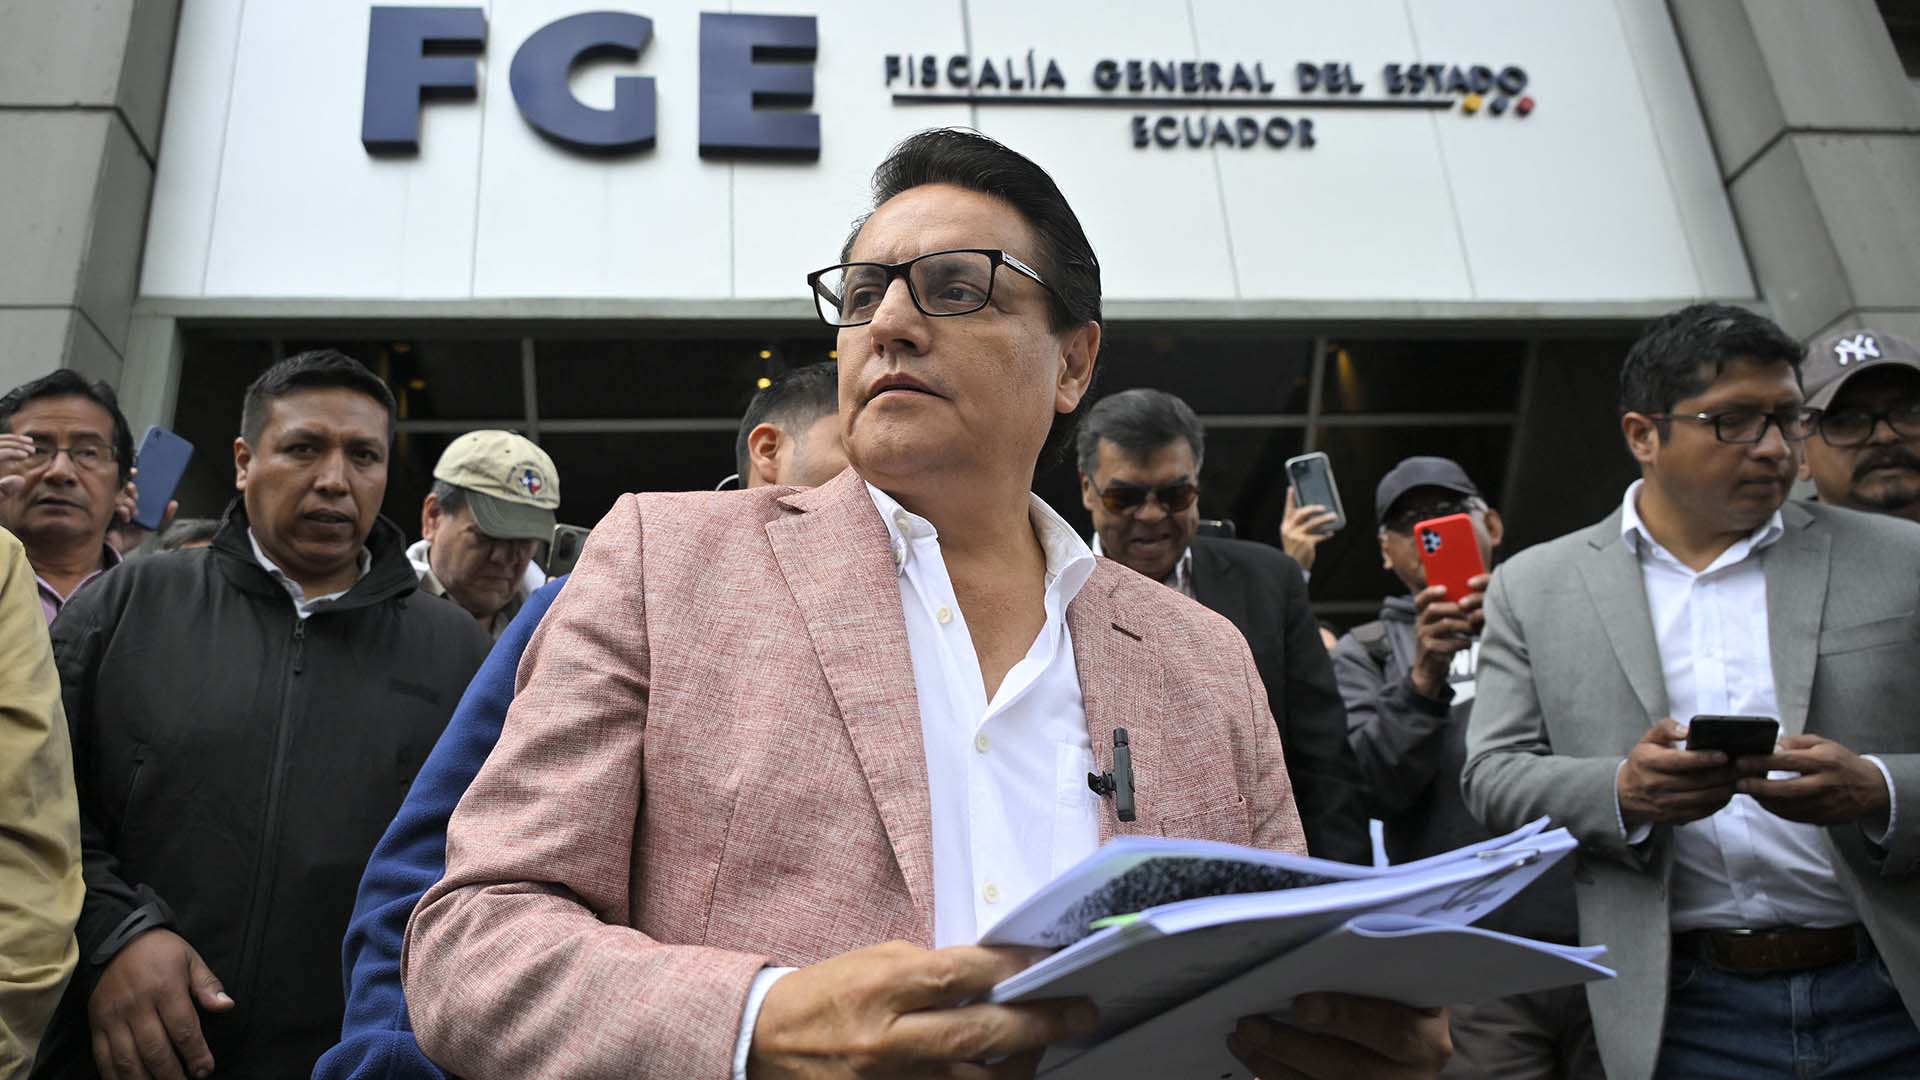 A man in glasses and a pink jacket holding a stack of papers at a press conference.